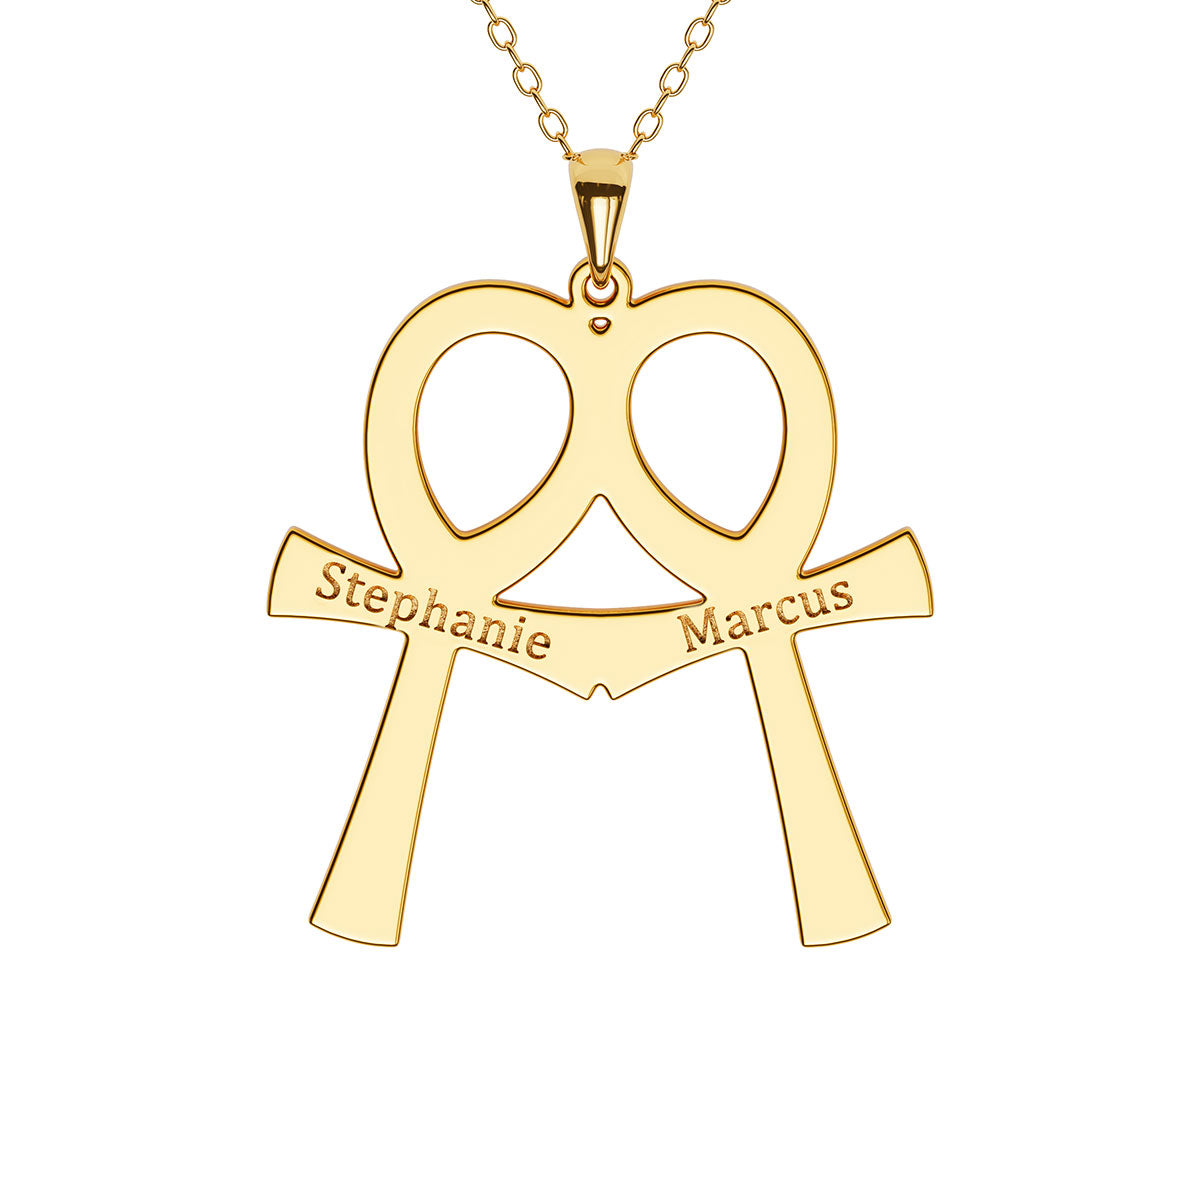 Double Ankh Egyptian Cross Necklace With Personalized Engraving